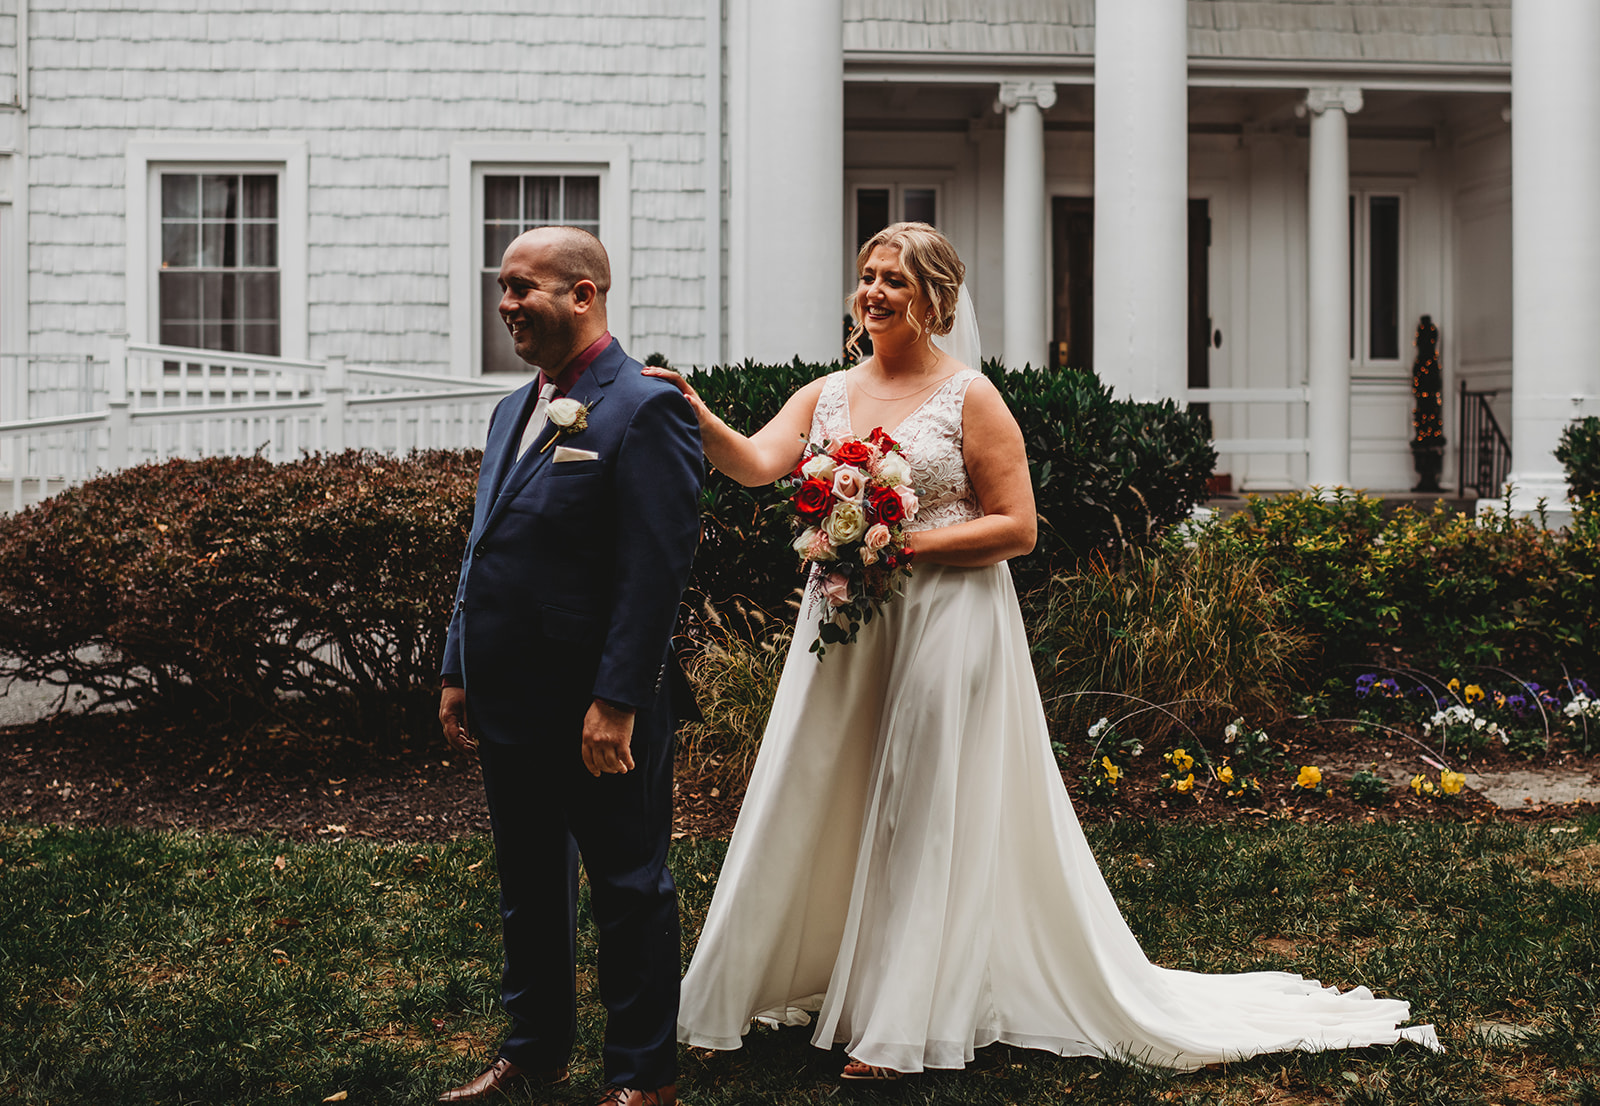 Bride tops on her groom shoulders as he faces the other way for a surprise first look before the wedding ceremony photographed by Maryland wedding photographer